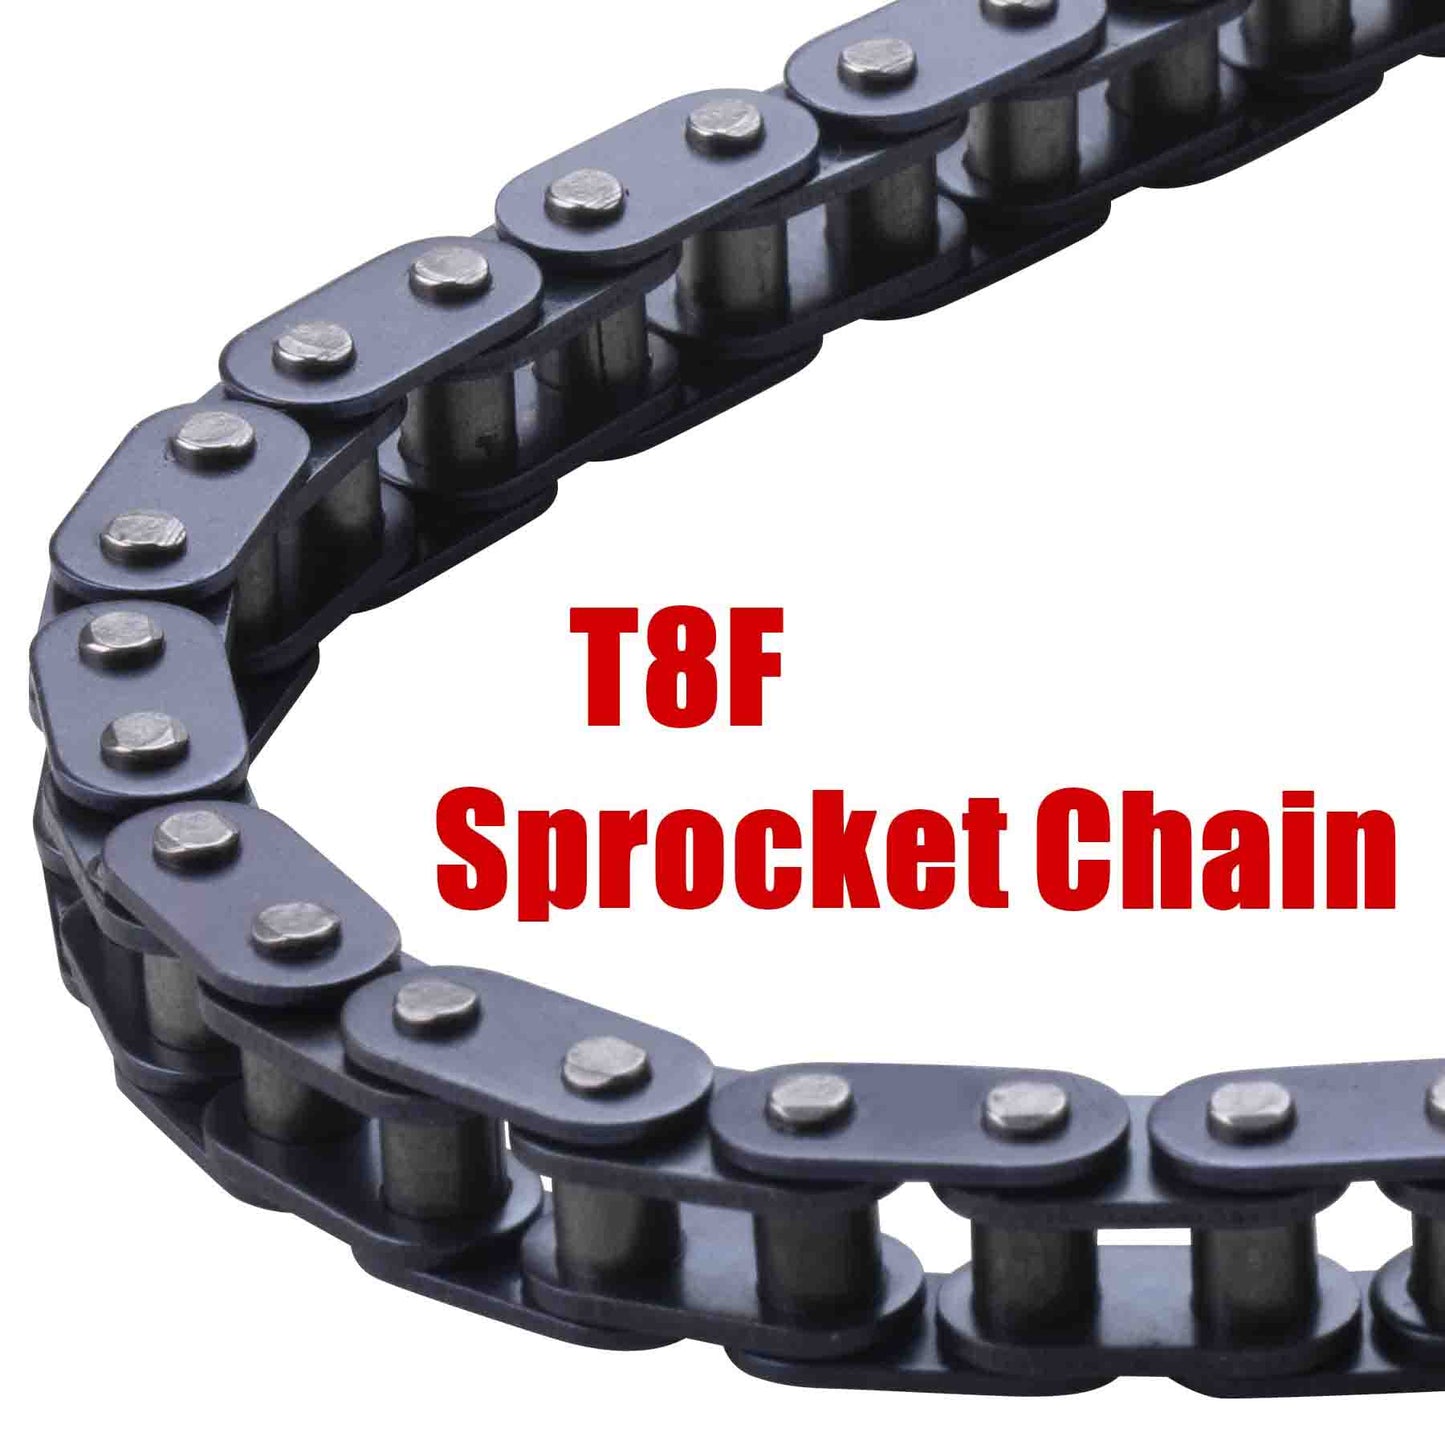 SYX MOTO Chain for 58cc Dirt Bike VK, T8F 124 Links